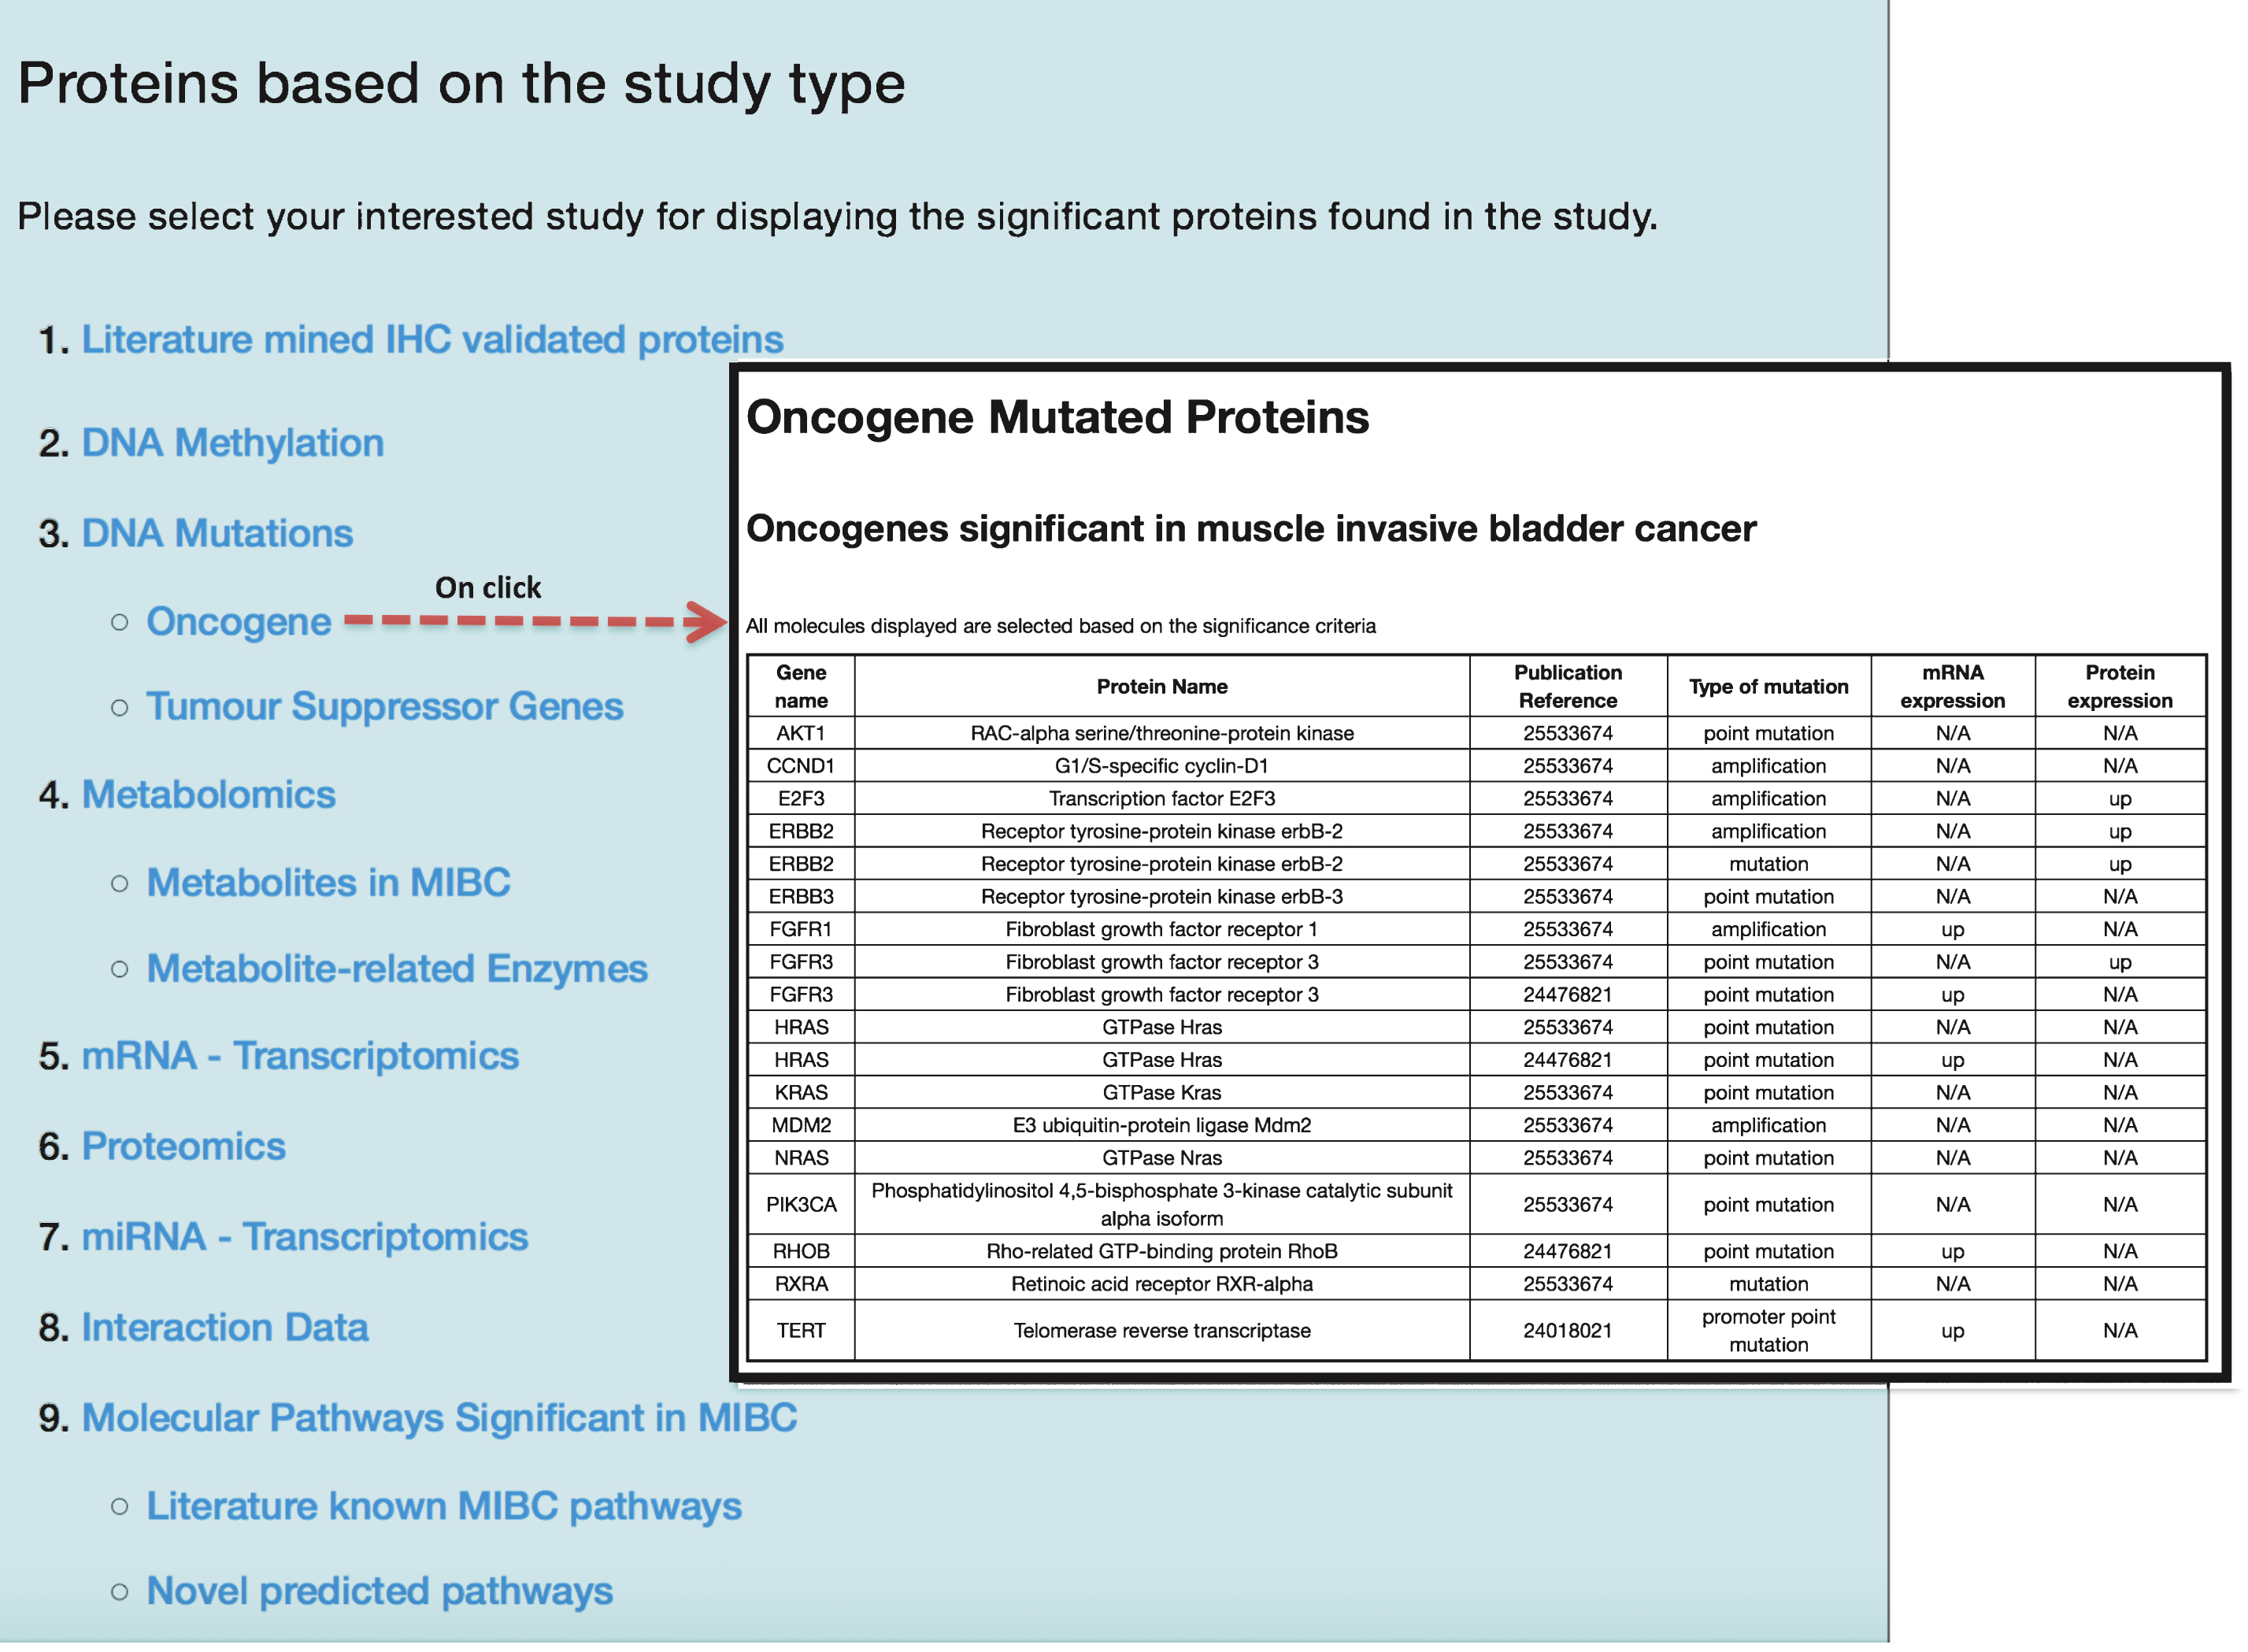 Display of molecular features based on study type from the BcCluster database. Molecular features significant in muscle invasive BC are organized and displayed based on the study type. Users can access these molecular features and retrieve biological information by clicking any of the listed study types. Additionally, all the results displayed in the application can be downloaded in various file formats (.csv,.txt and.xls).